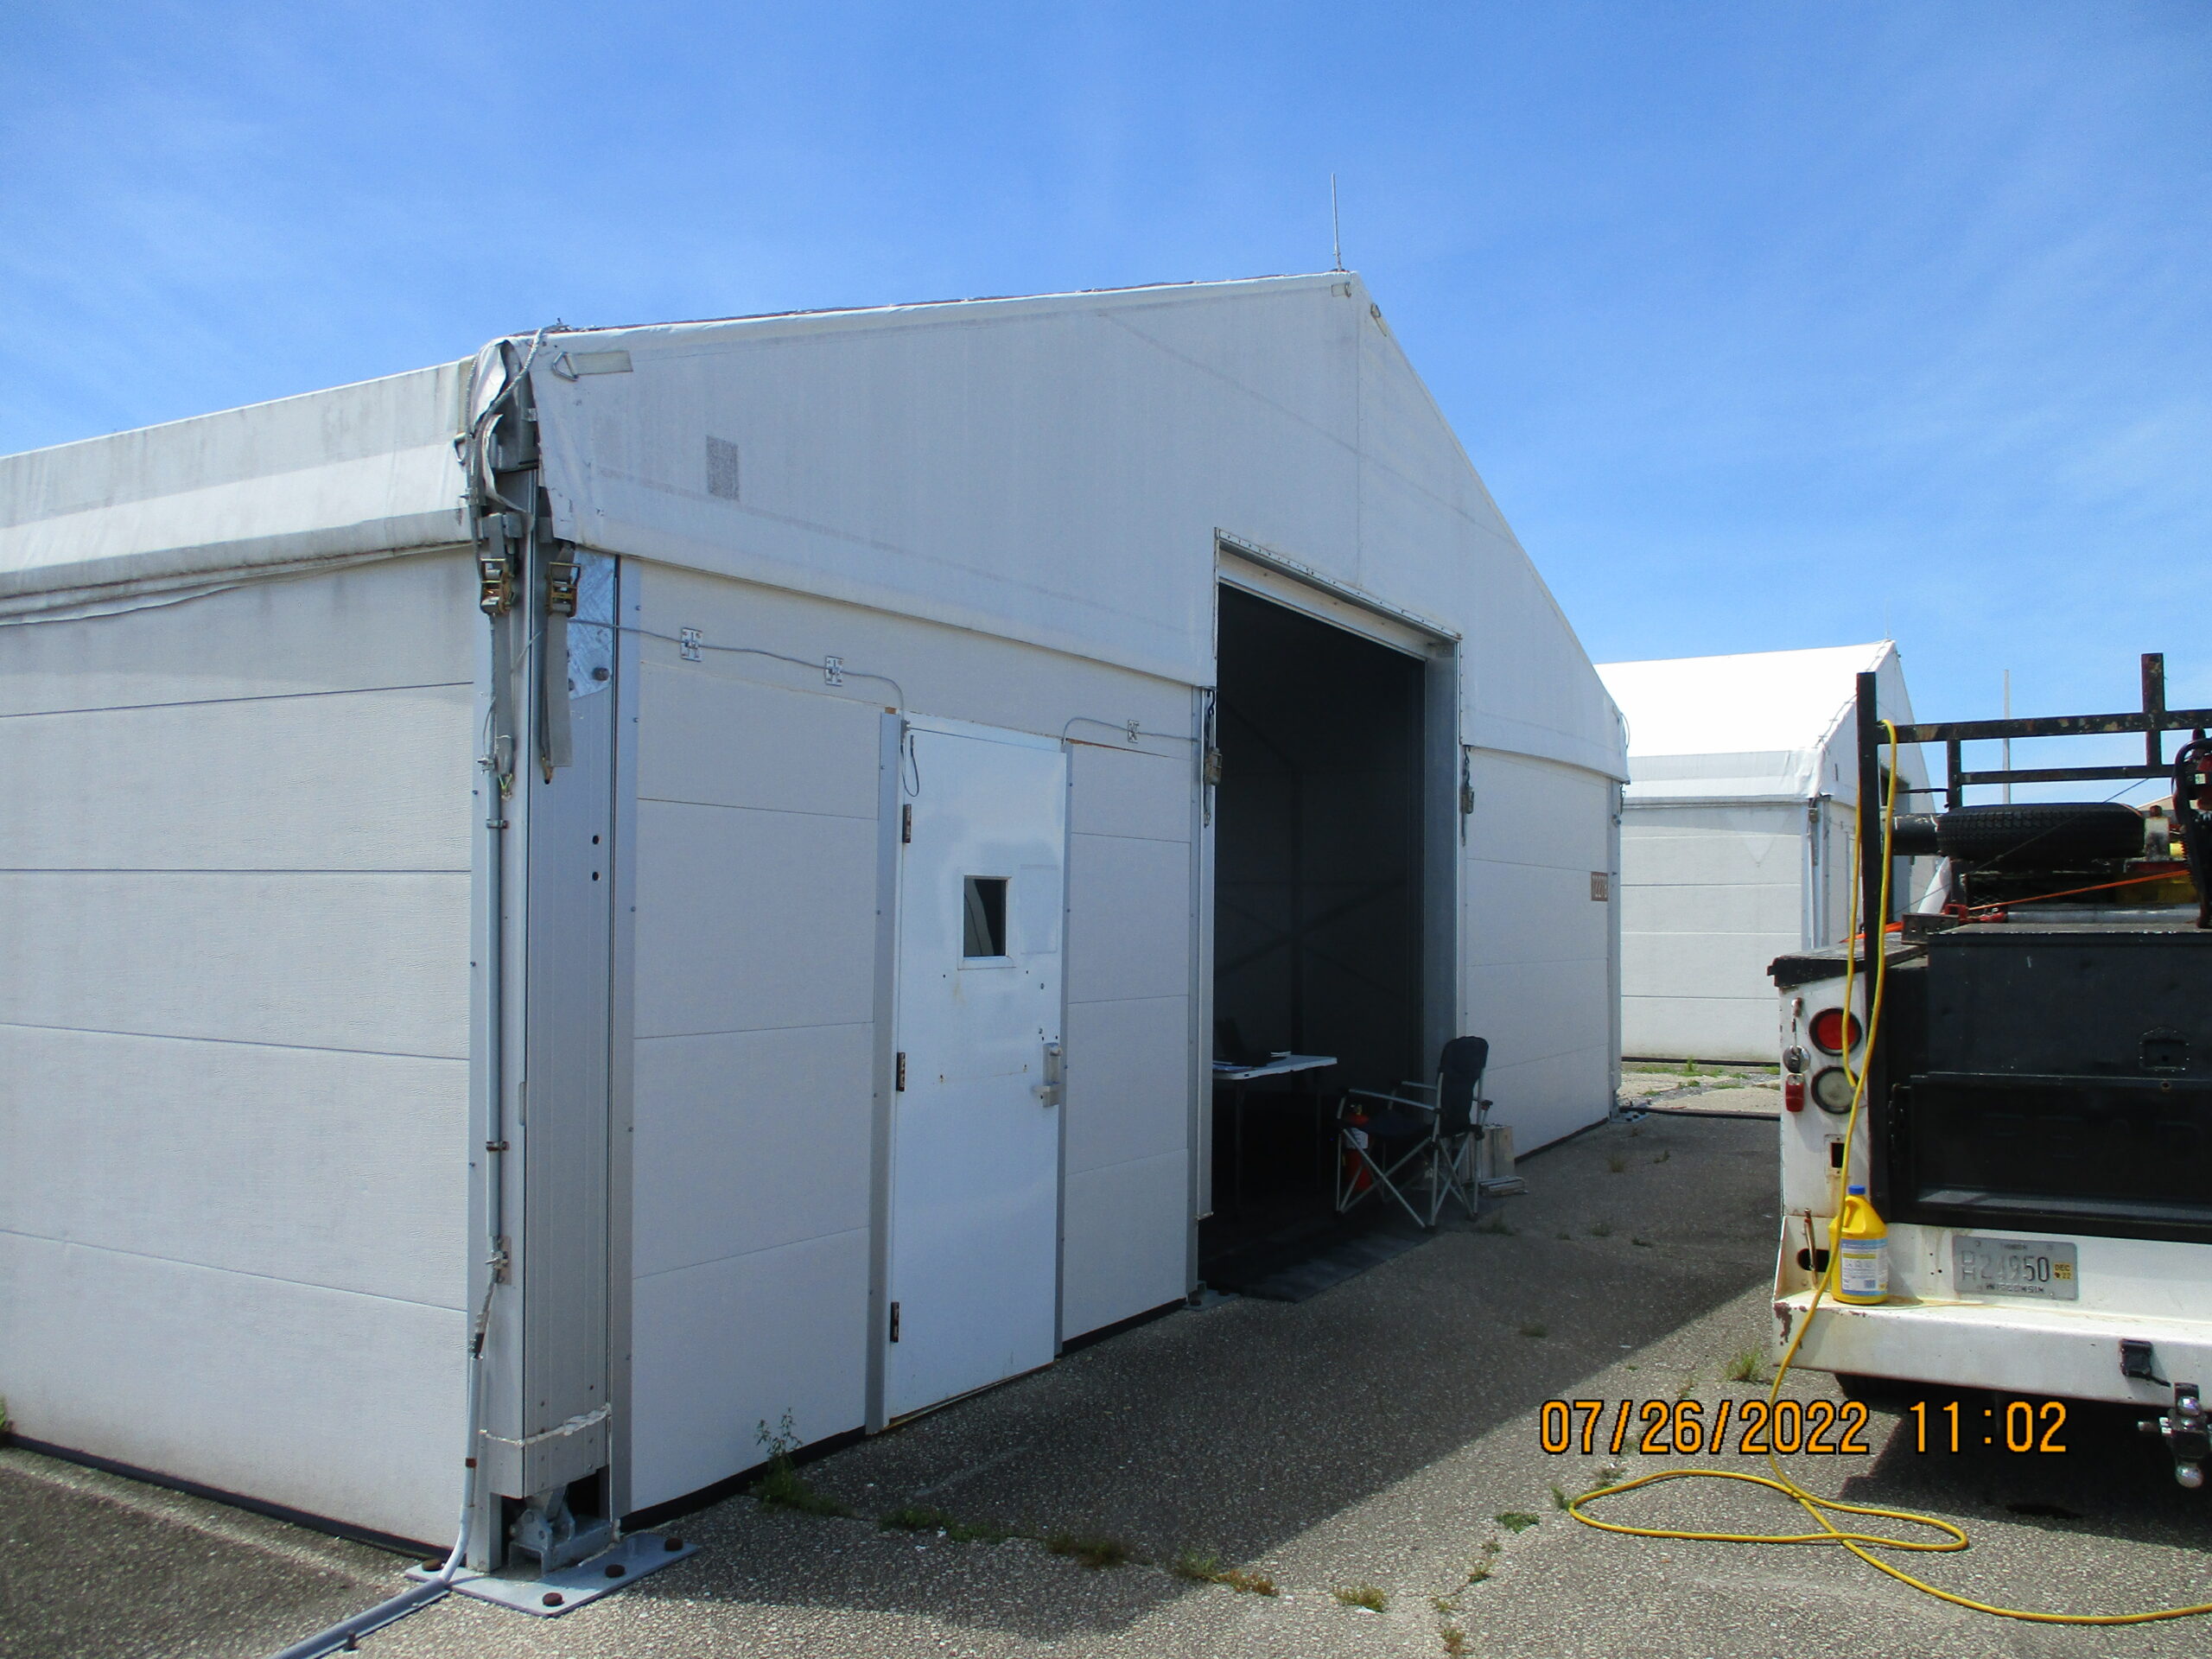 Relocate Chute Shops for F35 and H3 Operation, Tyndall AFB, FL